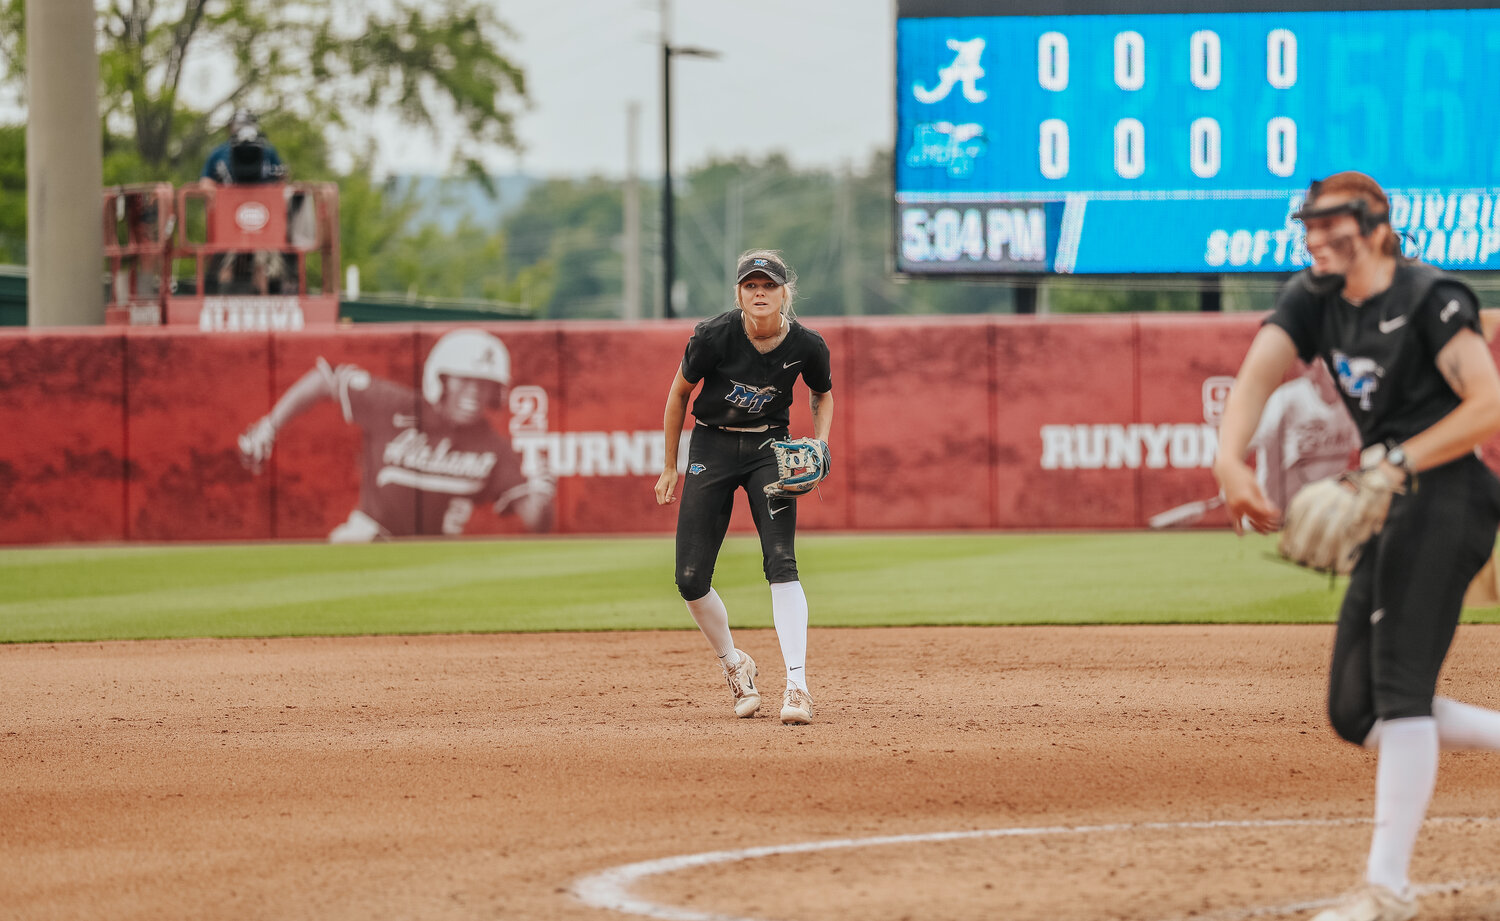 Former Forrest Lady Rocket was the team leader in batting average with MTSU during her sophomore season before announcing her transfer to Tennessee.